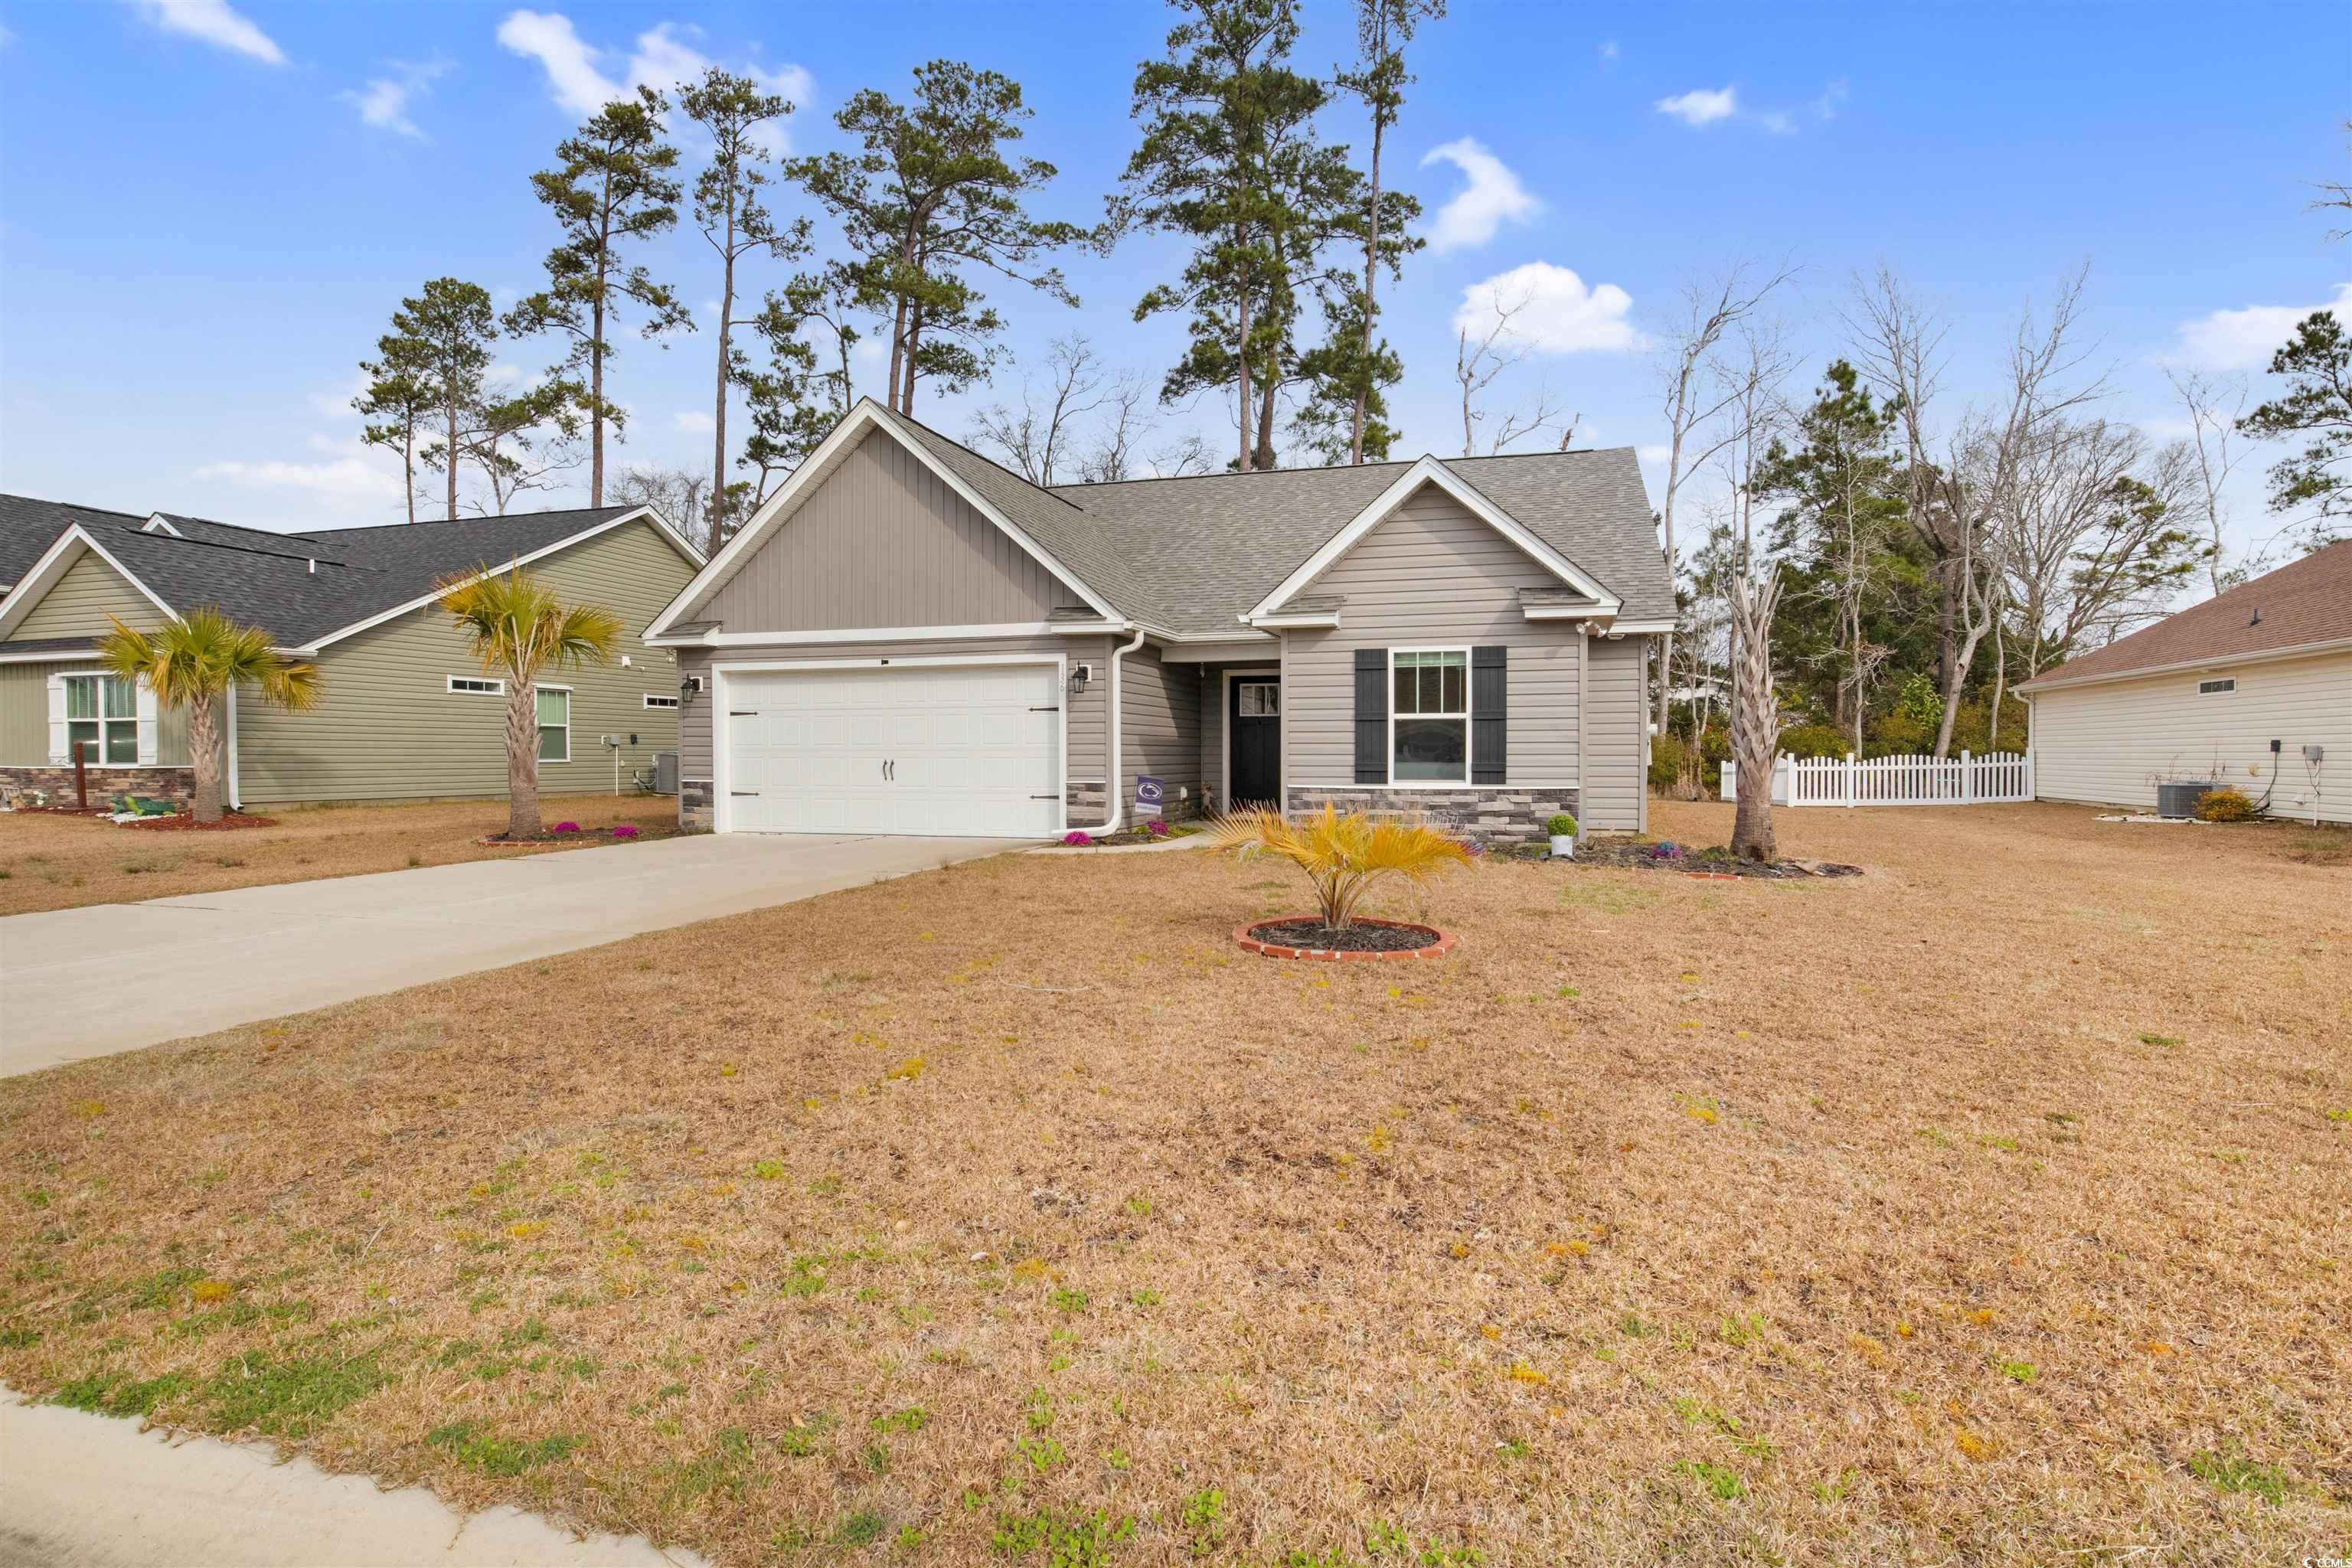 Photo one of 136 Sage Circle Little River SC 29566 | MLS 2405015